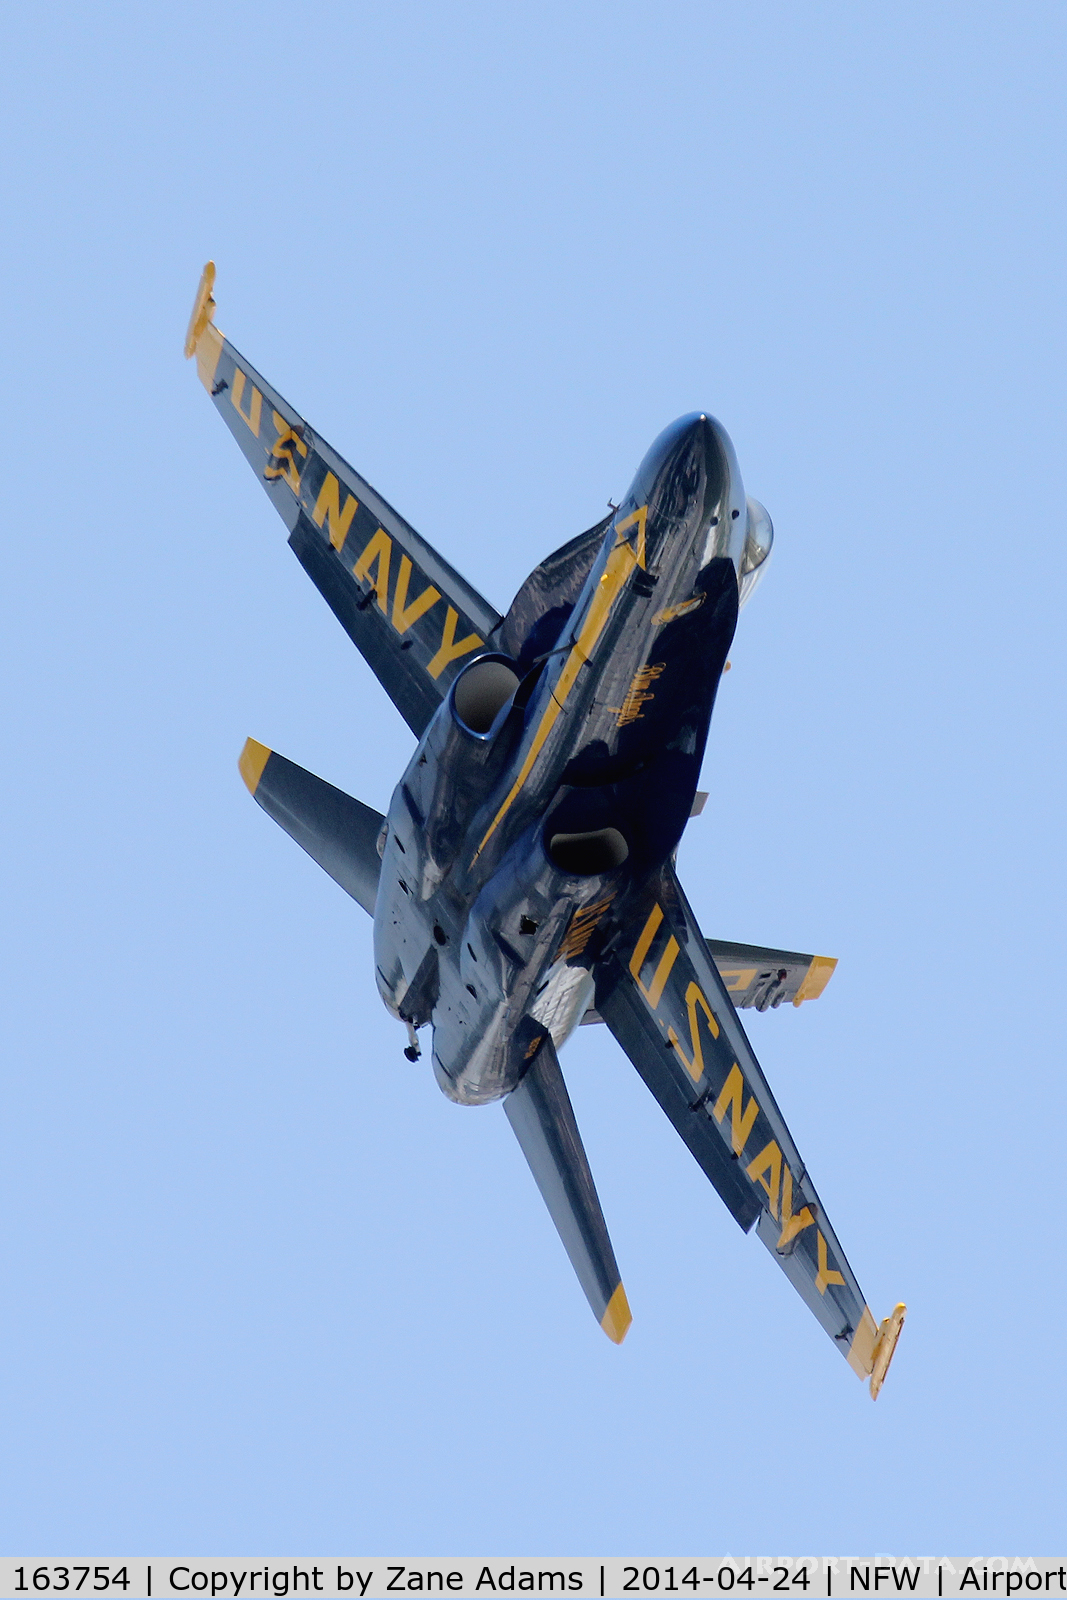 163754, 1989 McDonnell Douglas F/A-18C Hornet C/N 0829/C112, US Navy Blue Angles at the 2014 Airpower Expo, NASJRB Fort Worth